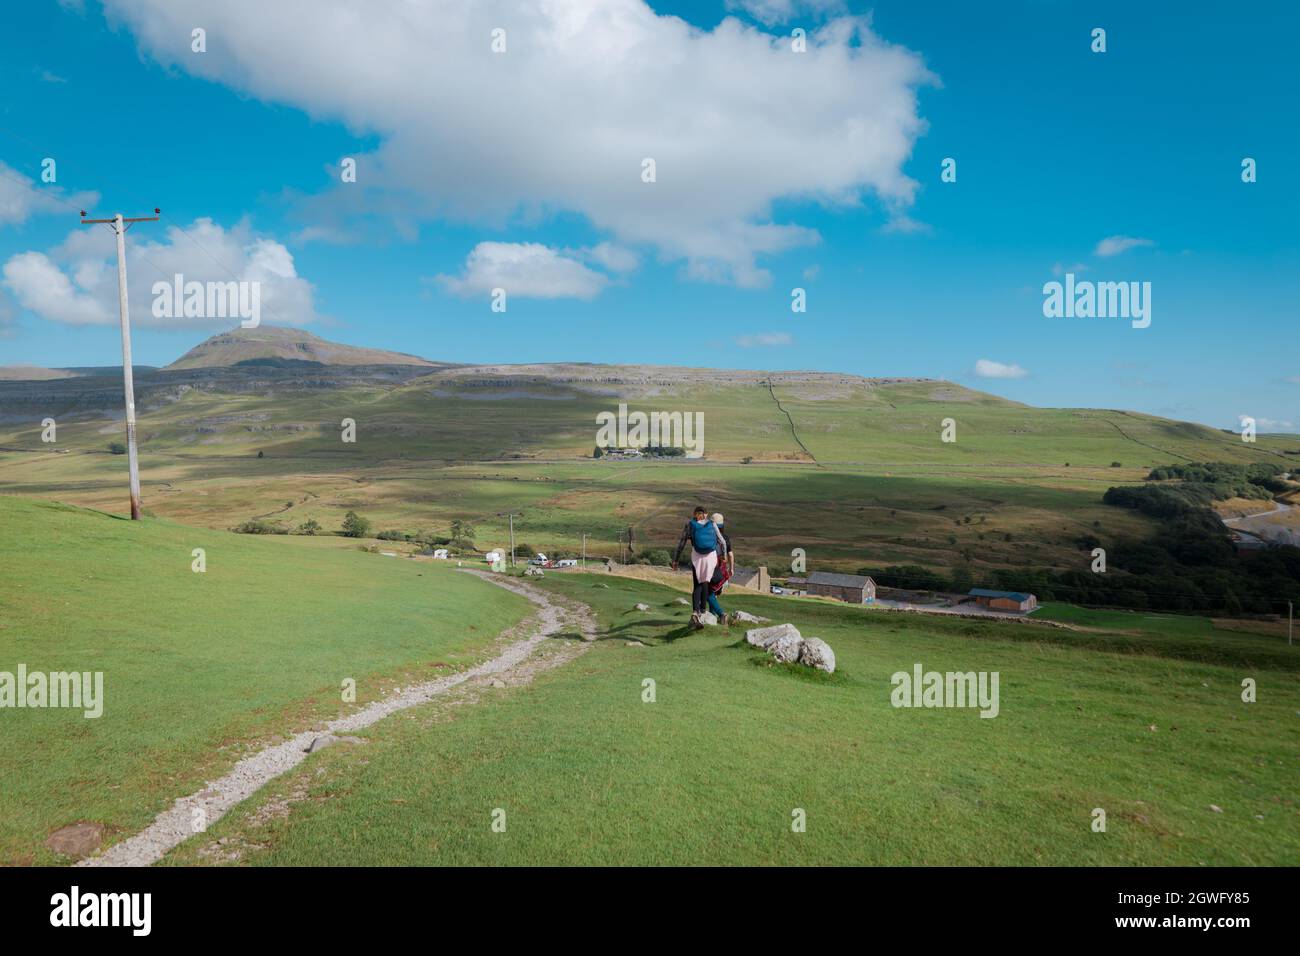 Walkers on Twistleton Lane, a roman road, with landscape views of Ingleborough peak and White Scar Cave in the Yorkshire Dales Stock Photo